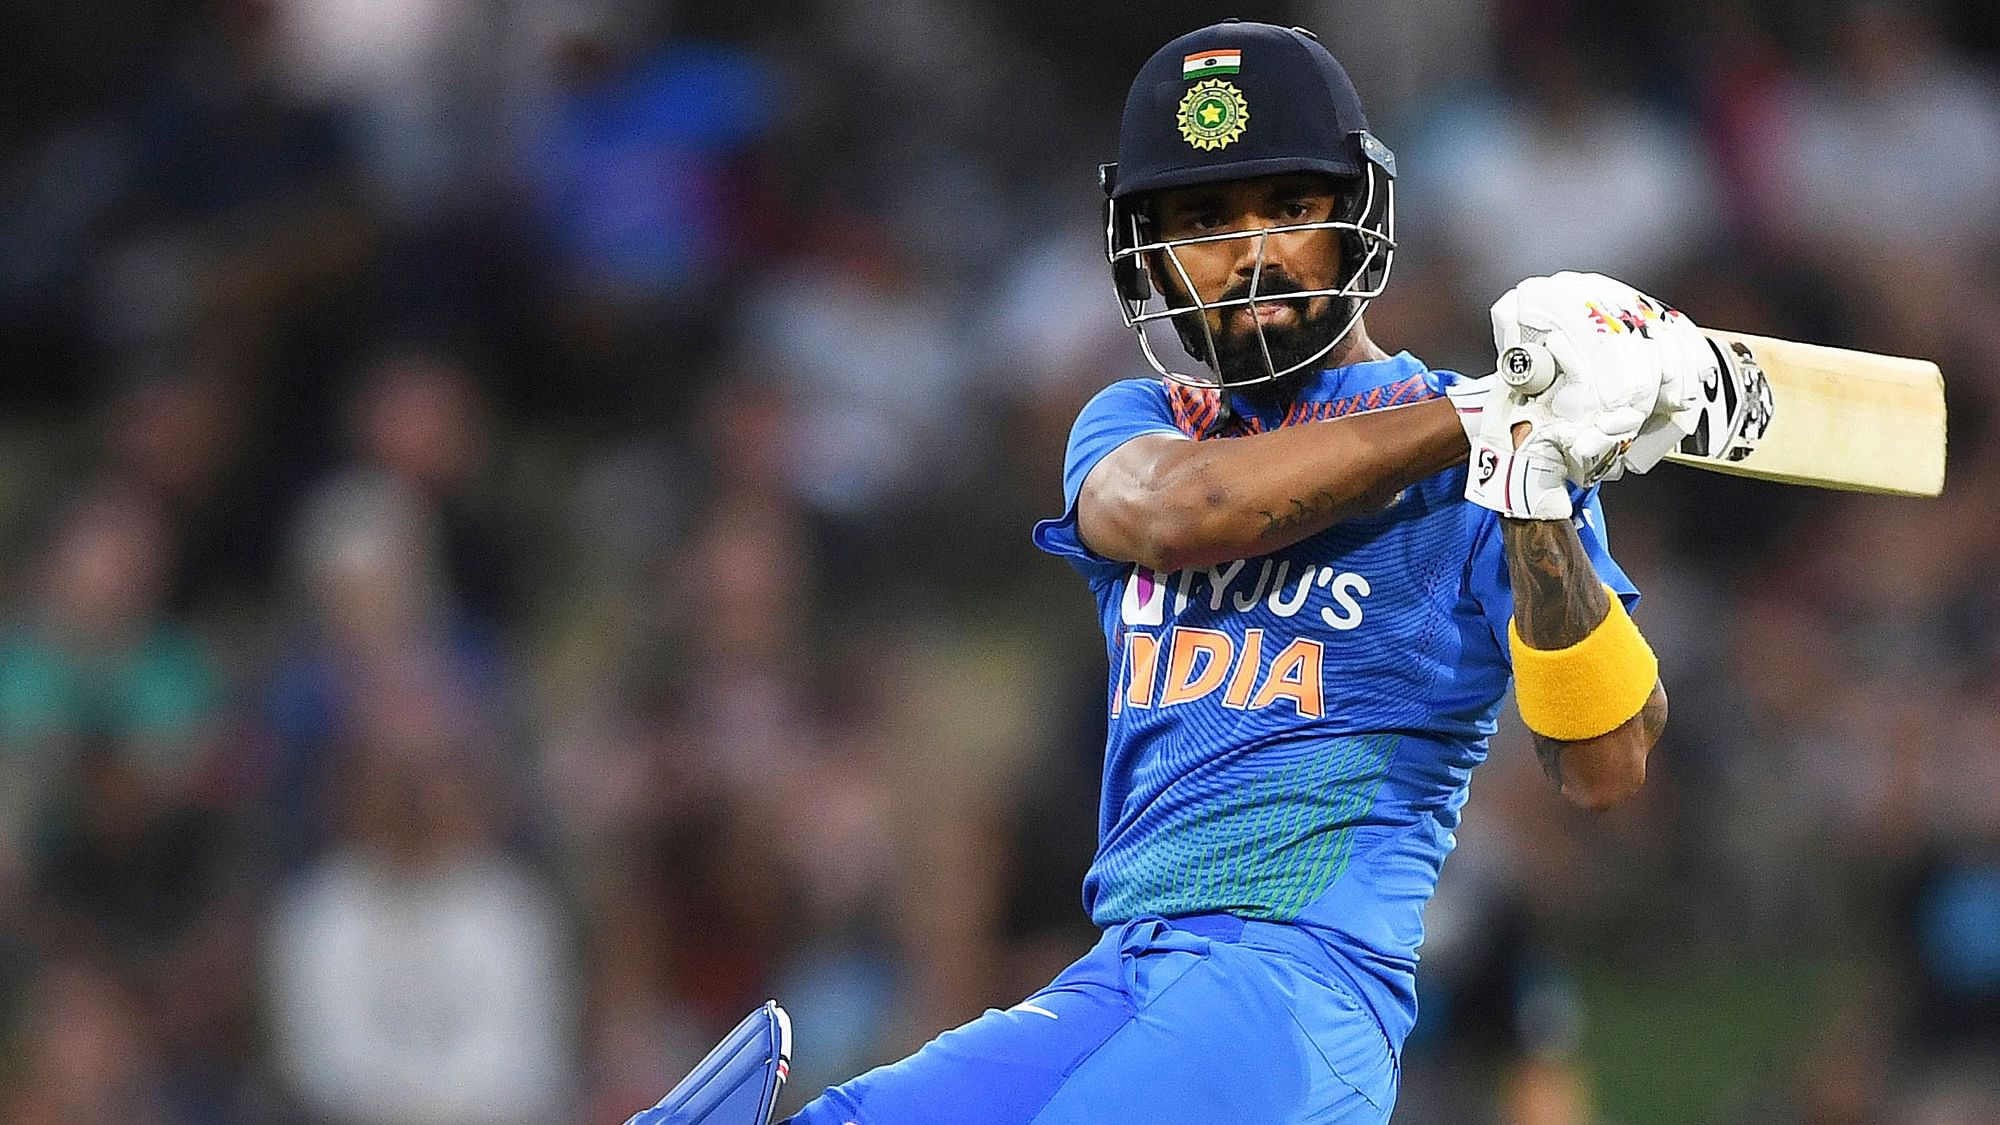 KL Rahul played a brilliant knock of unbeaten 88 that helped India post a formidable 348-run target for the Kiwis.